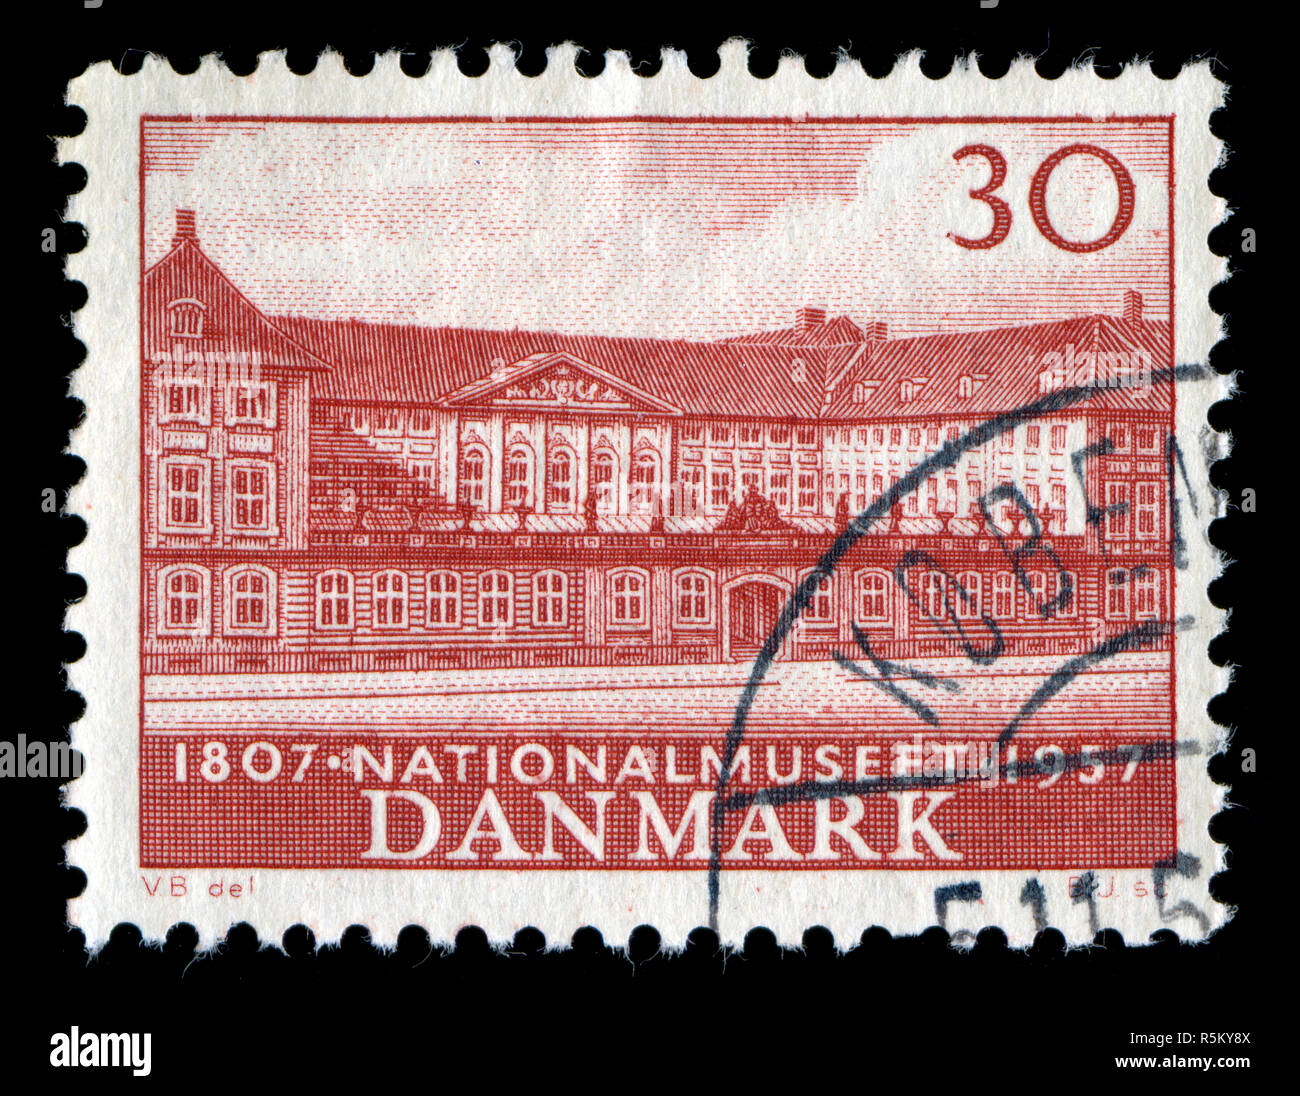 Postage stamp from Denmark in the National Museum series issued in 1957 Stock Photo